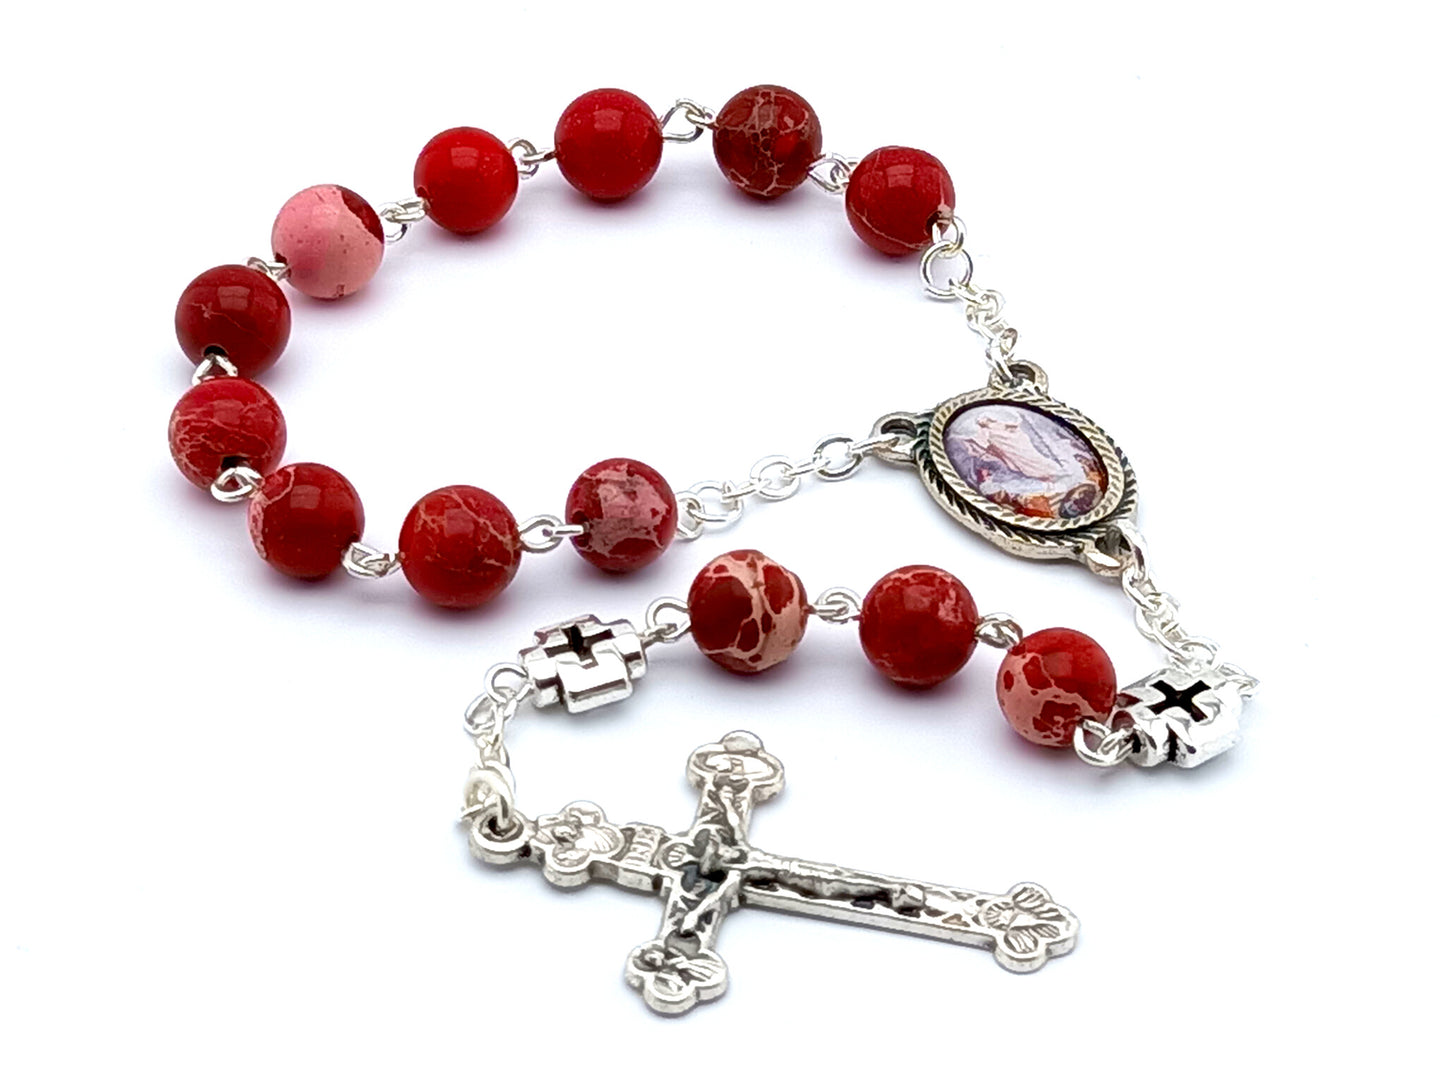 The Ascension unique rosary beads single decade rosary with red jasper beads, silver crosses, picture centre medal and crucifix.